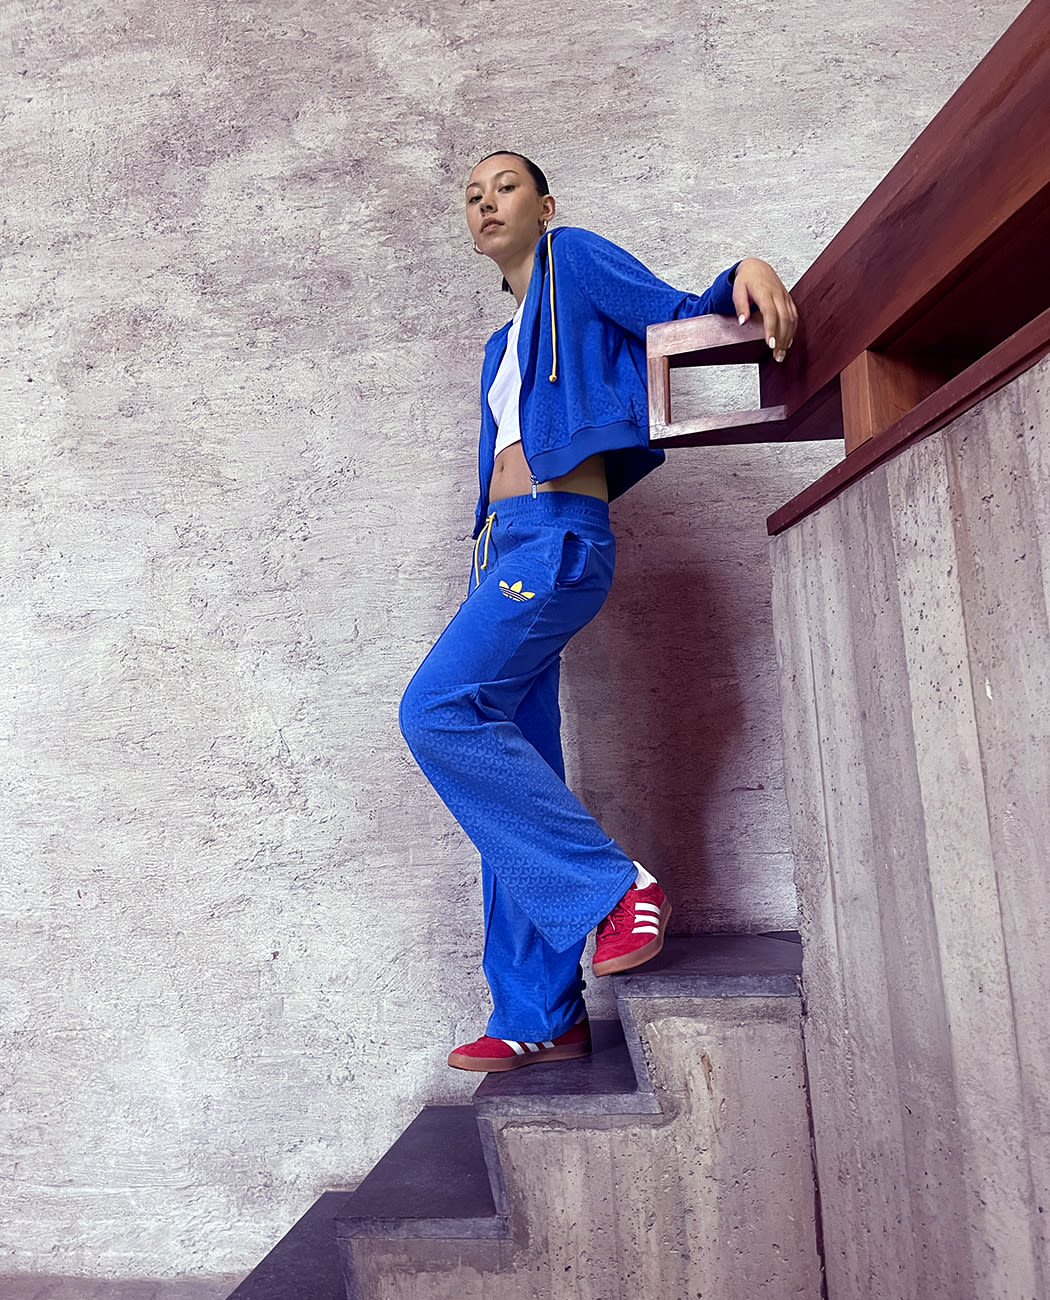 Female model standing on a flight of stairs wearing a blue outfit  on a white t-shirt and red adidas Gazelle sneakers with with stripes.